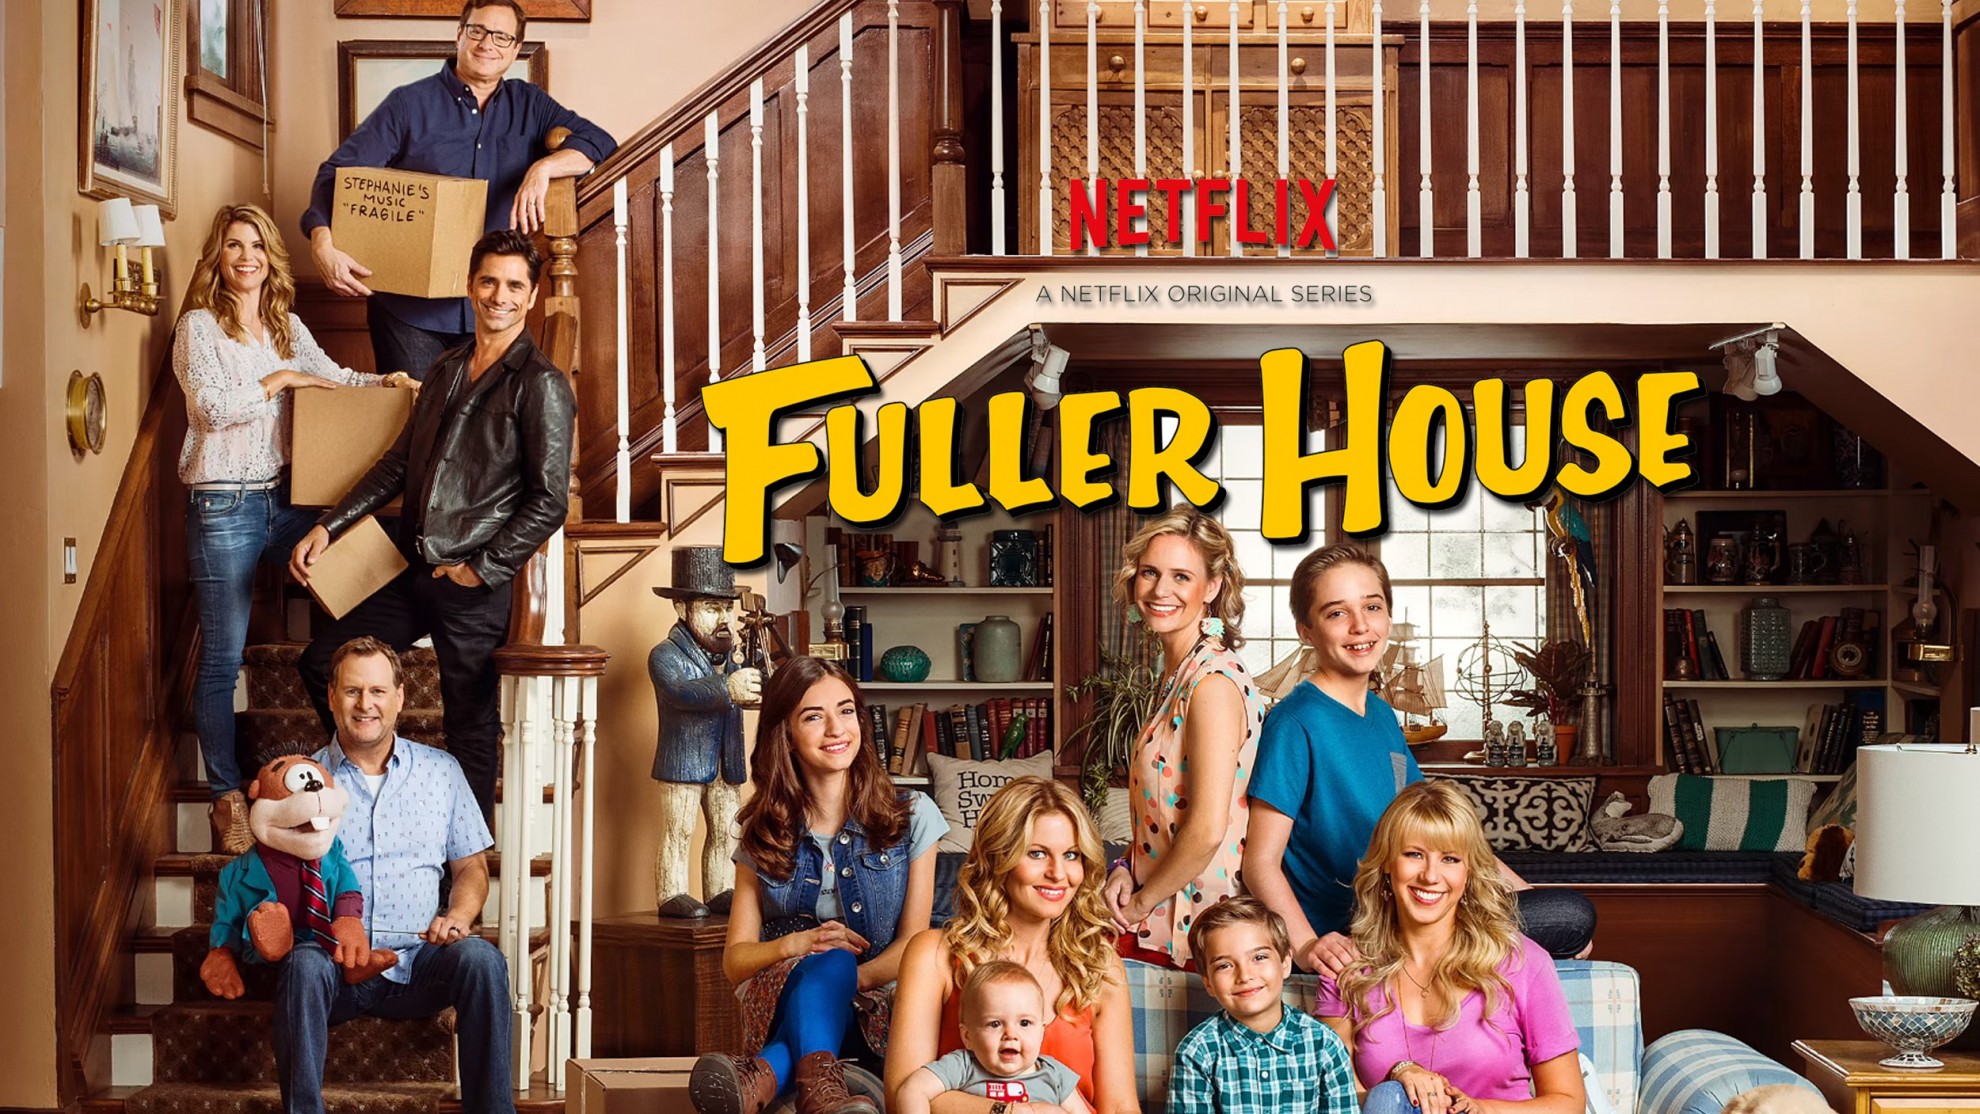 The house is full again. Fuller house is coming to Netflix February 26.